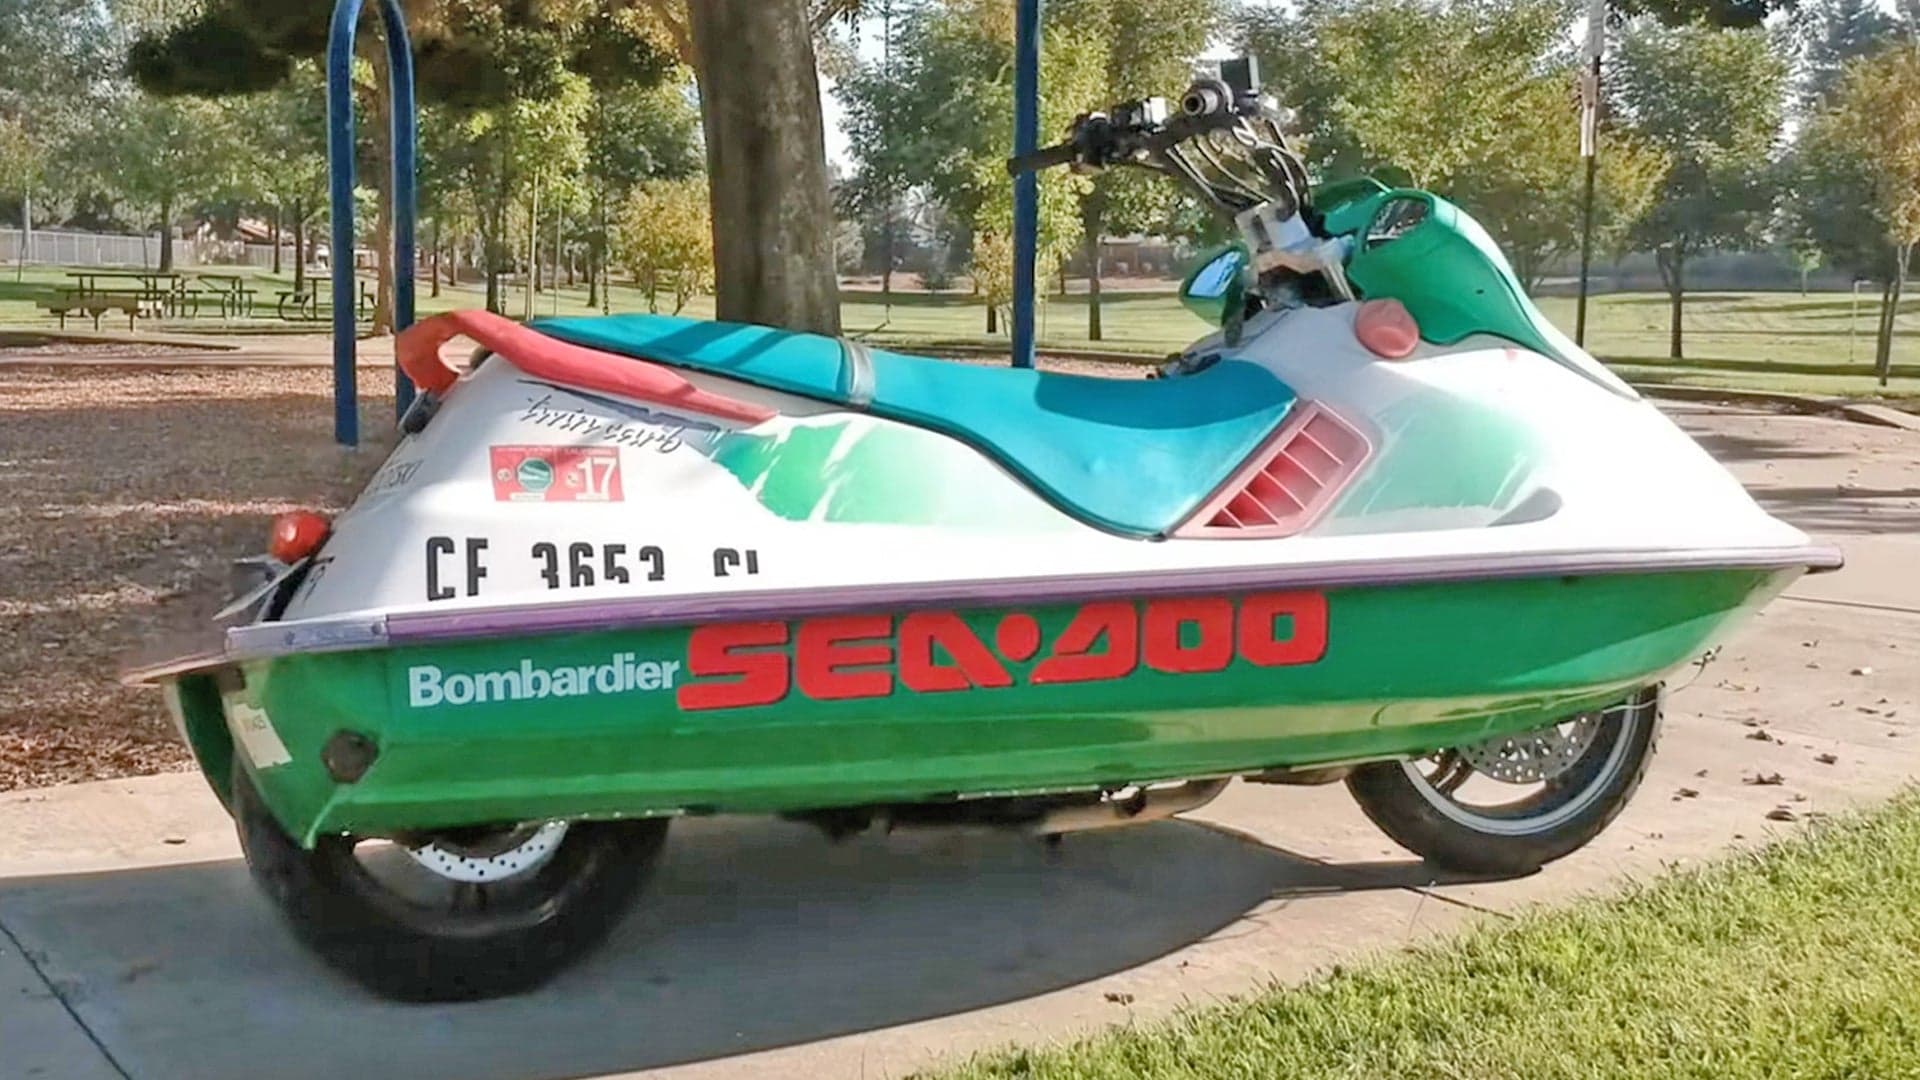 Converting Old Jet Skis Into Motorbikes Is a Mobility Trend We Can Get Behind